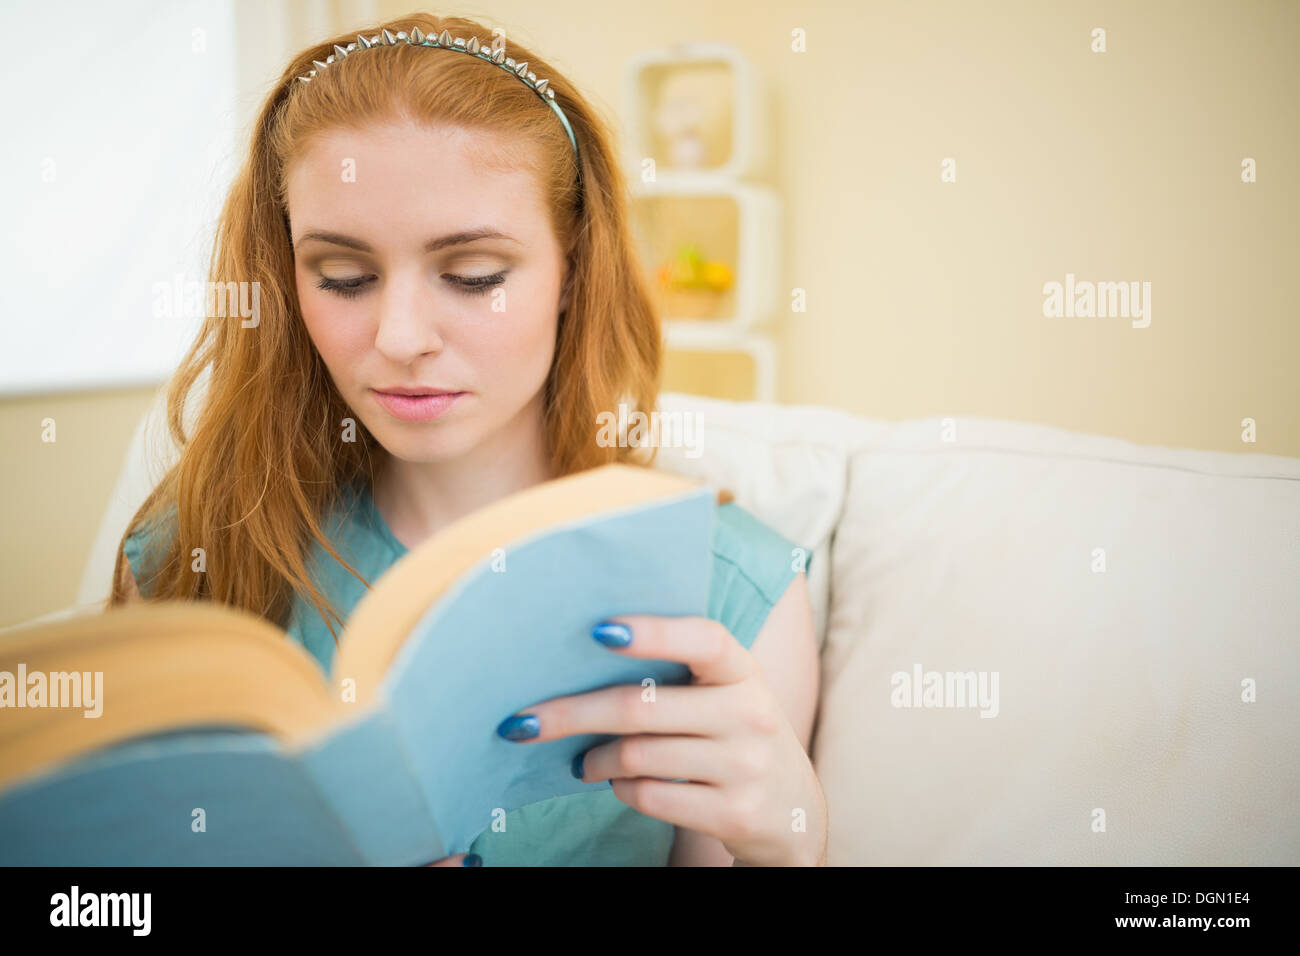 Engrossed redhead reading a book on the couch Stock Photo